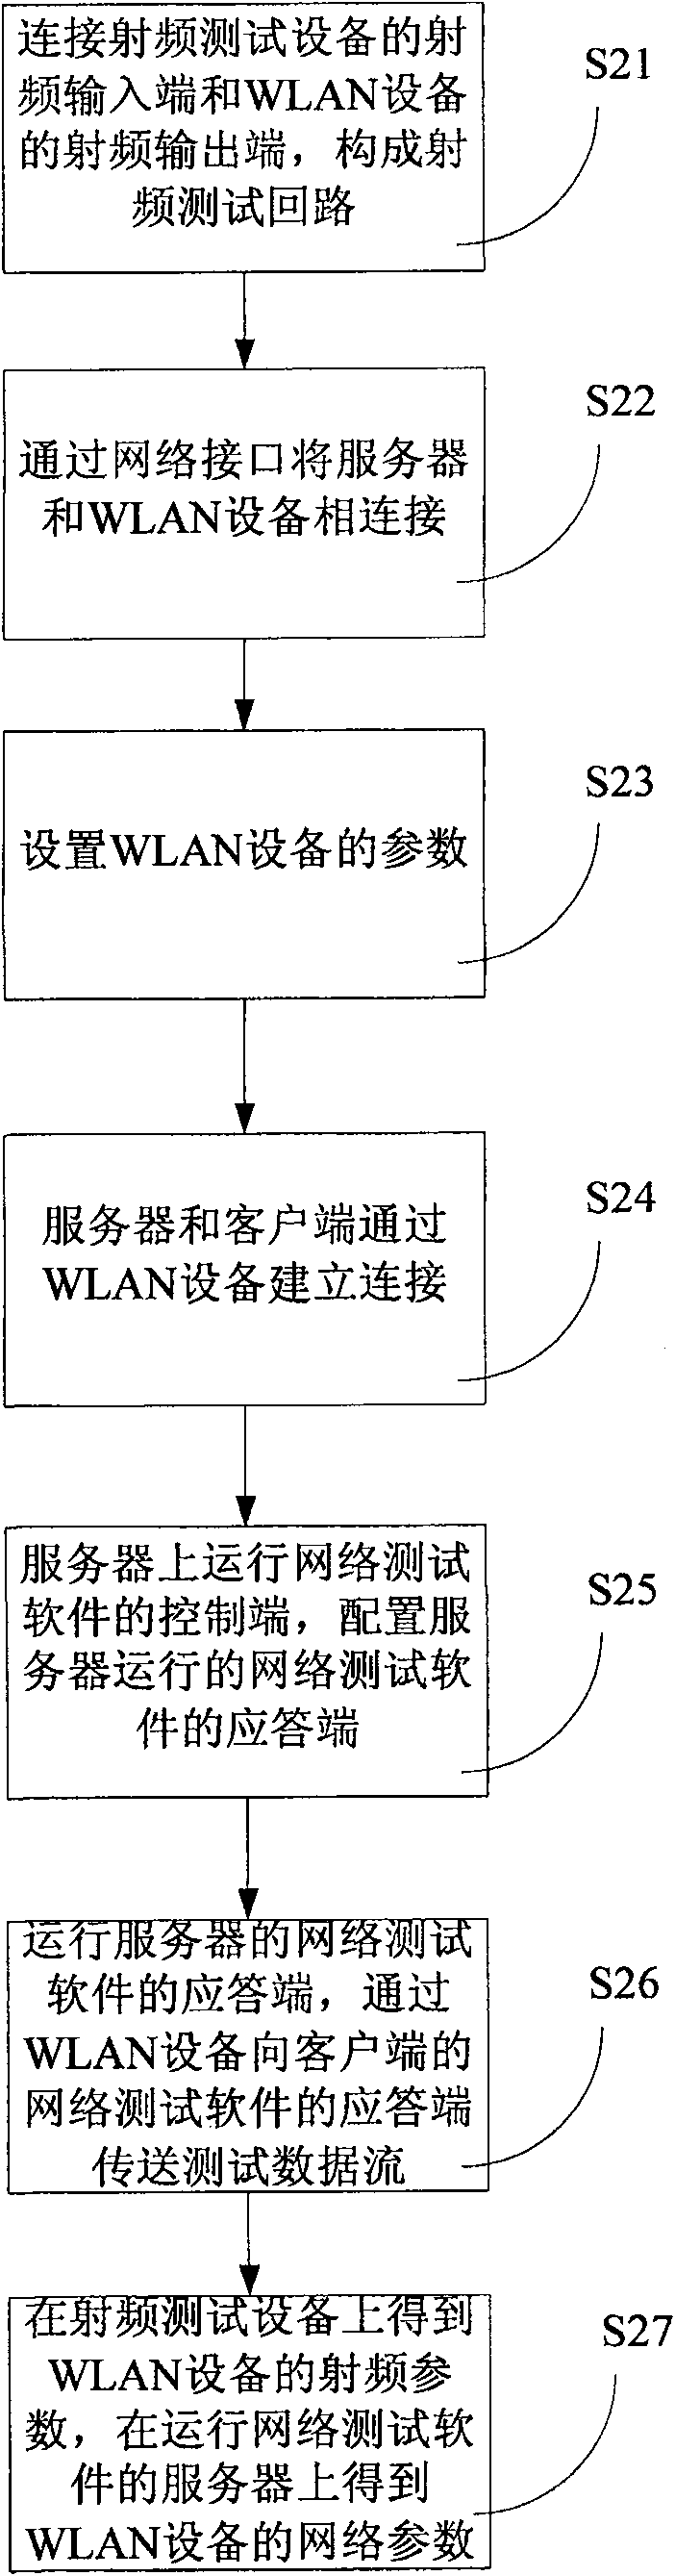 Test method and system for WLAN equipment index